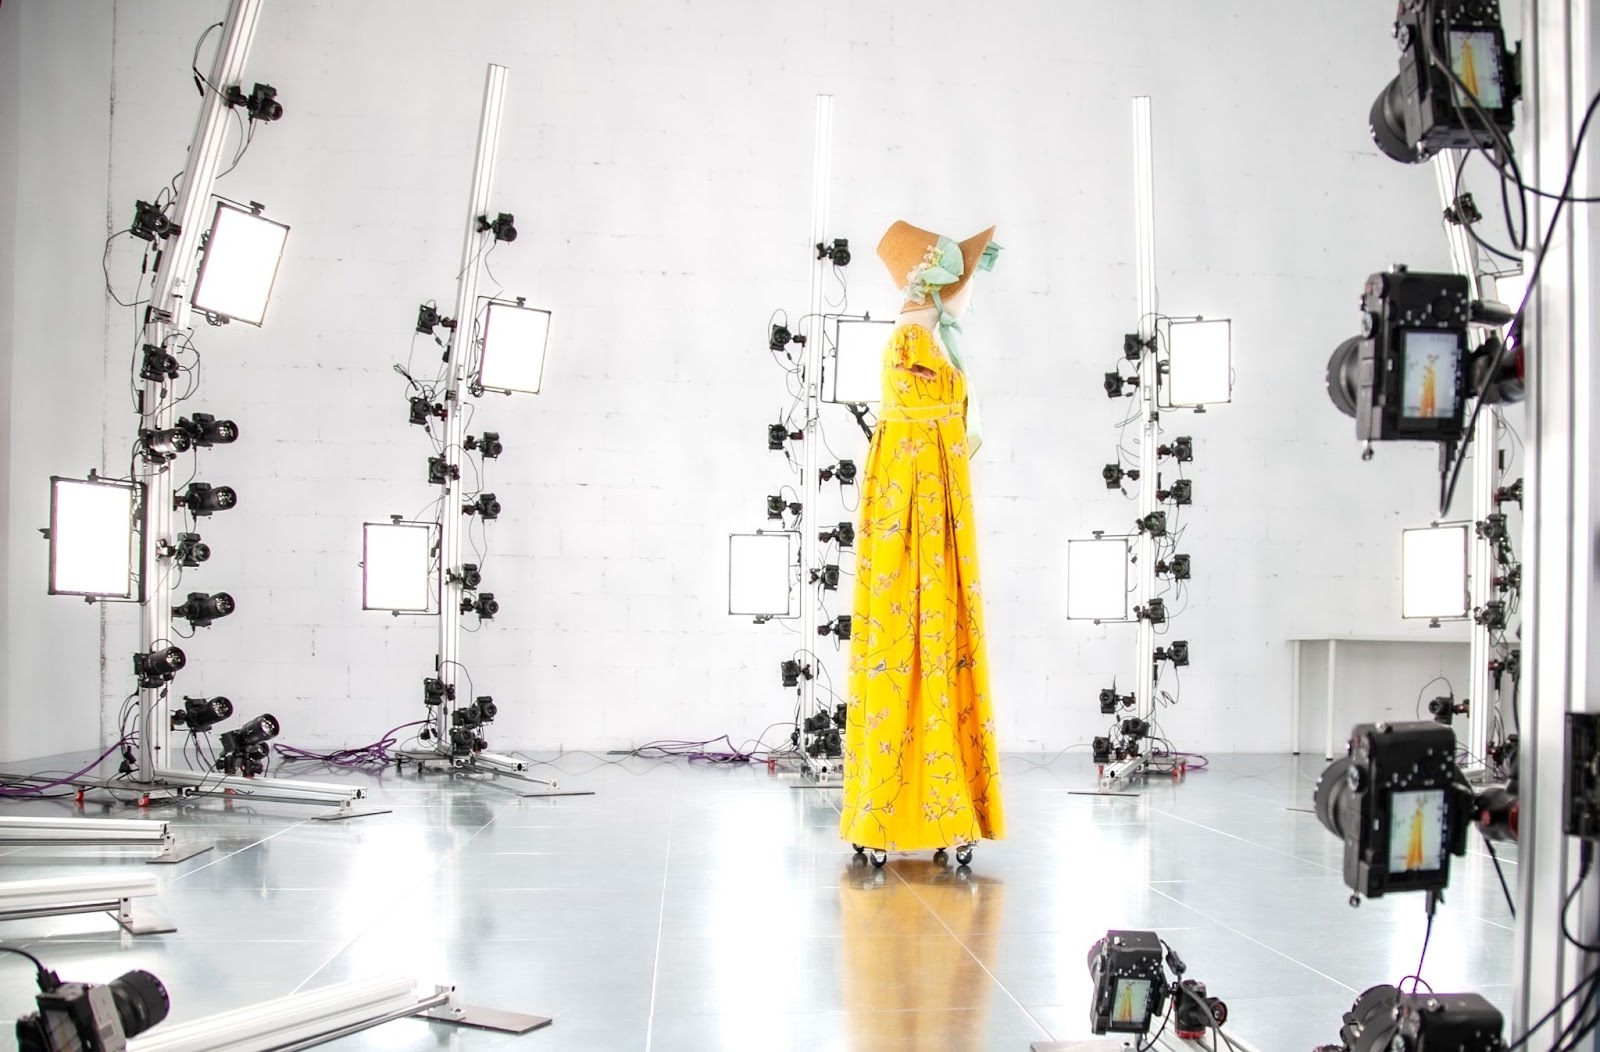 A long stand holds a hat and coat, placed in the center of the room, and is surrounded by cameras. Image courtesy of Peris Digital.